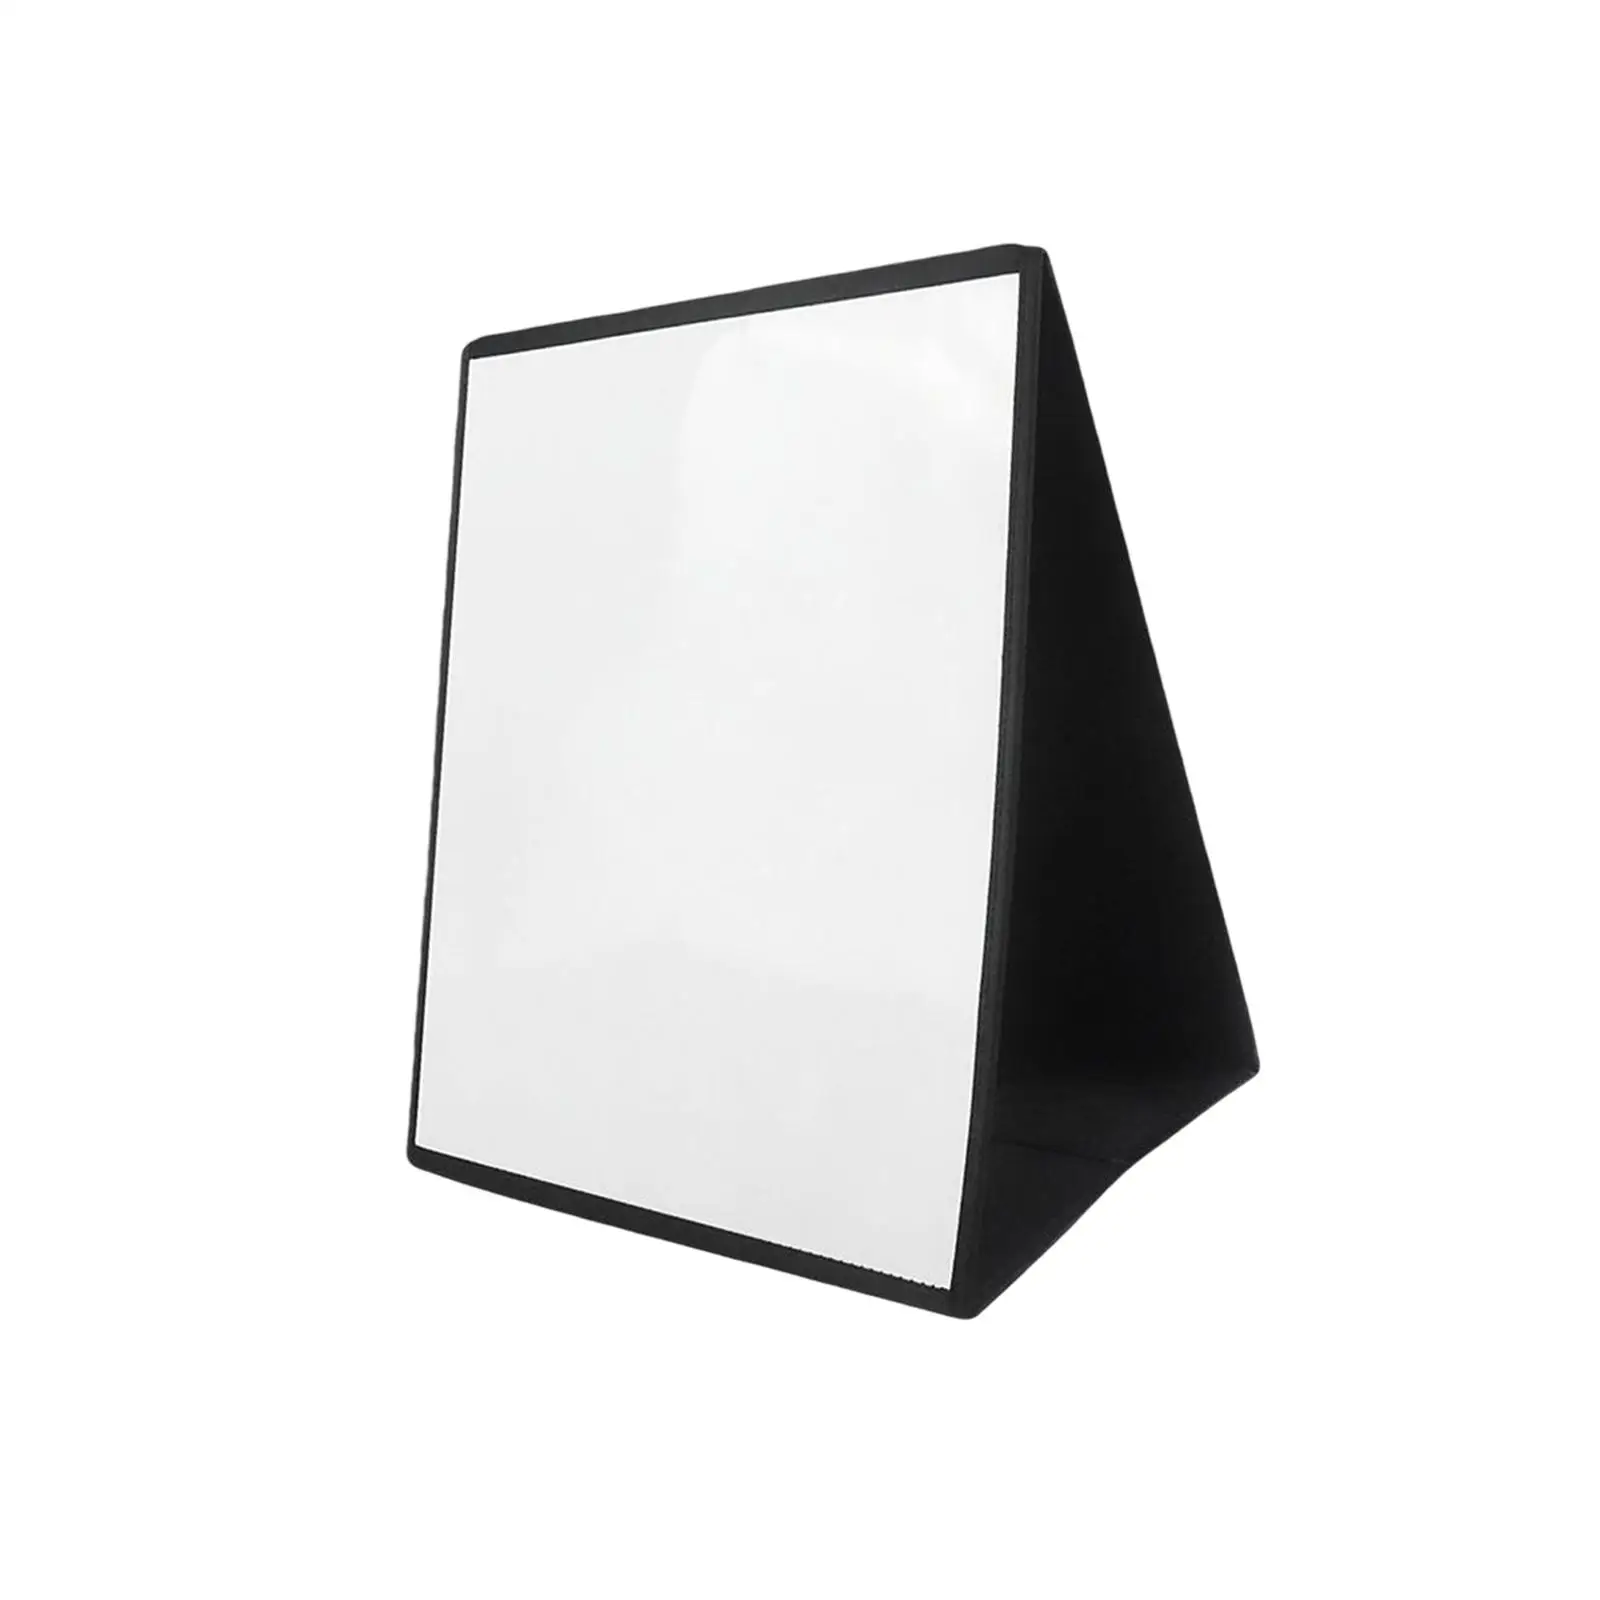 Small Dry Erase Whiteboard Memo Board Drawing Board Message Board Erasable Easel Double Sided Desktop Whiteboard for Office Home